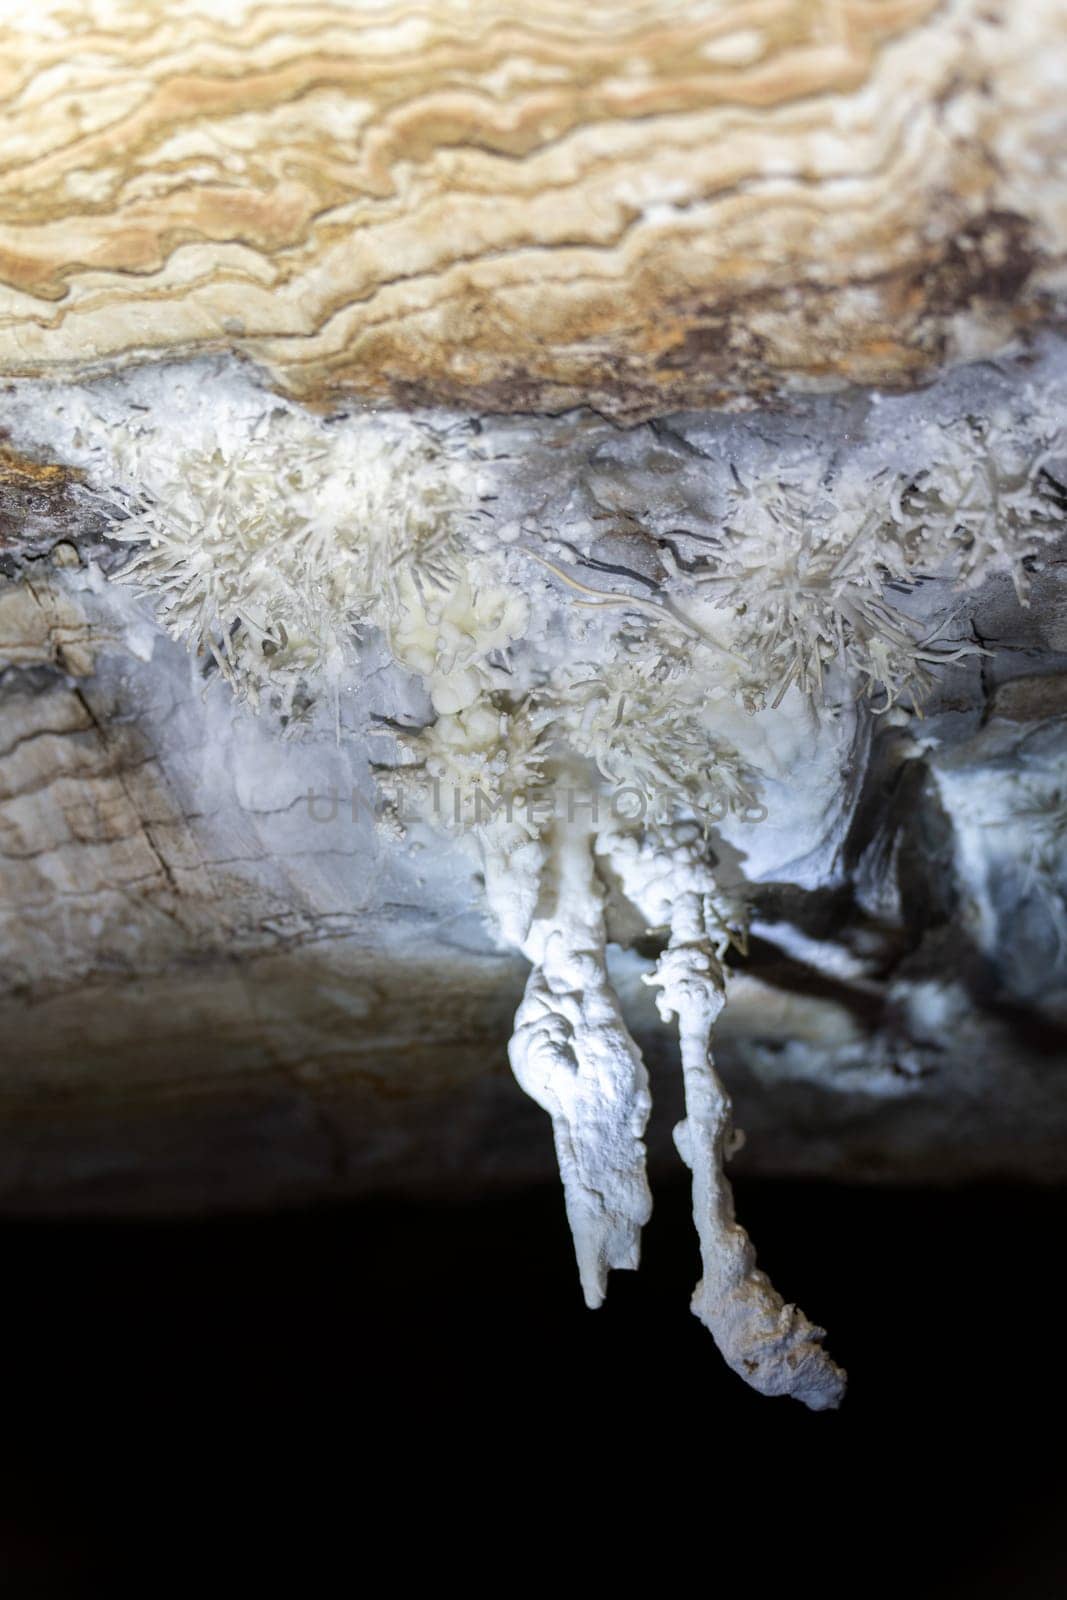 Pristine white stalactites against layered rock in a cave.